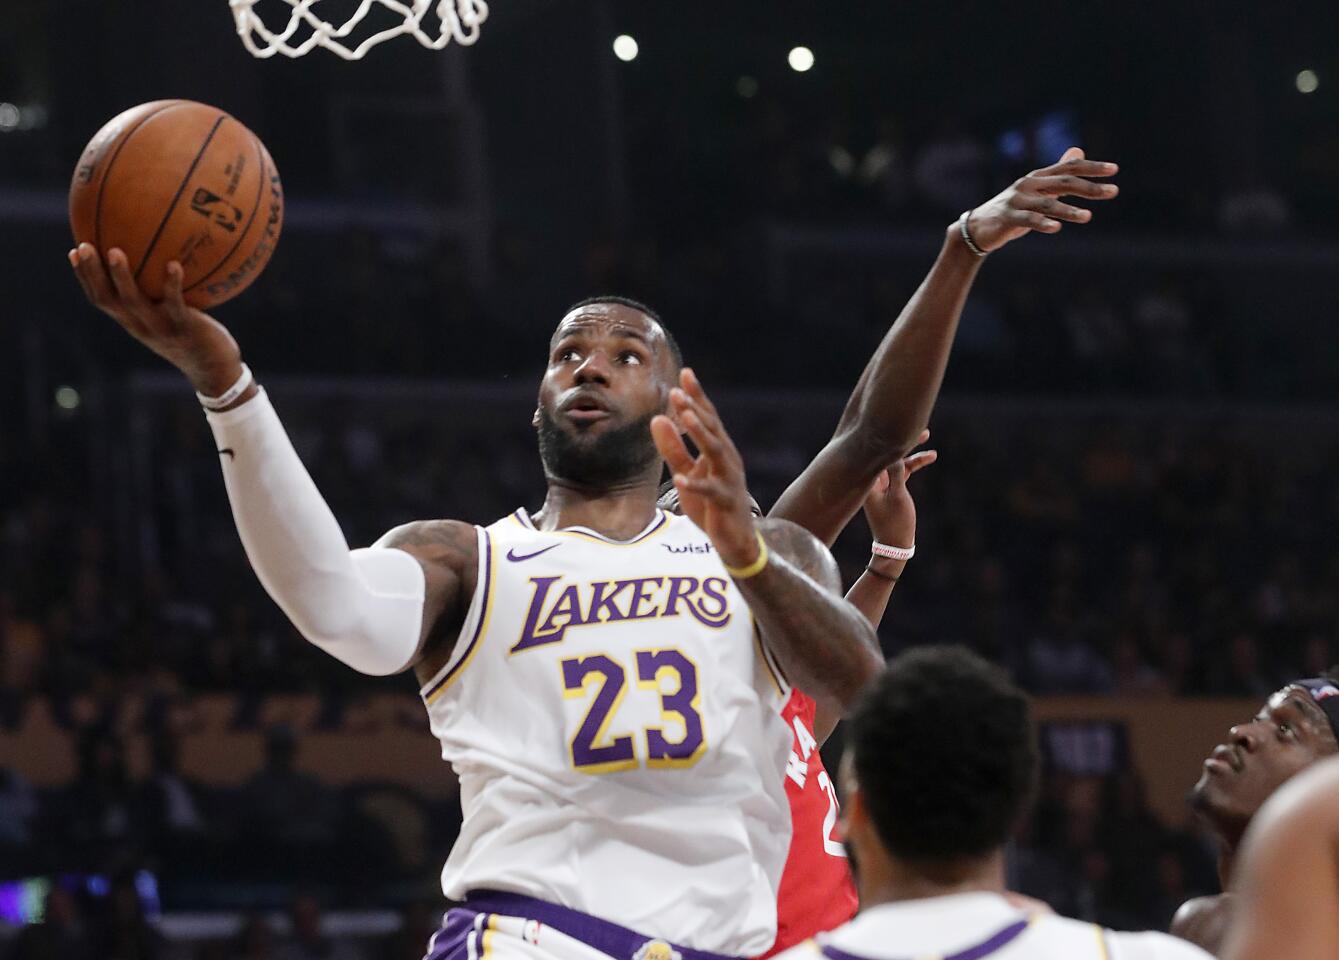 LOS ANGELES, CALIF. - NOV. 10, 2019. Lakers forward LeBron James drives to basket against the Raptors in the first quarter at Staples Center in Los Angeles on Sunday night, Nov. 10, 2019. (Luis Sinco/Los Angeles Times)